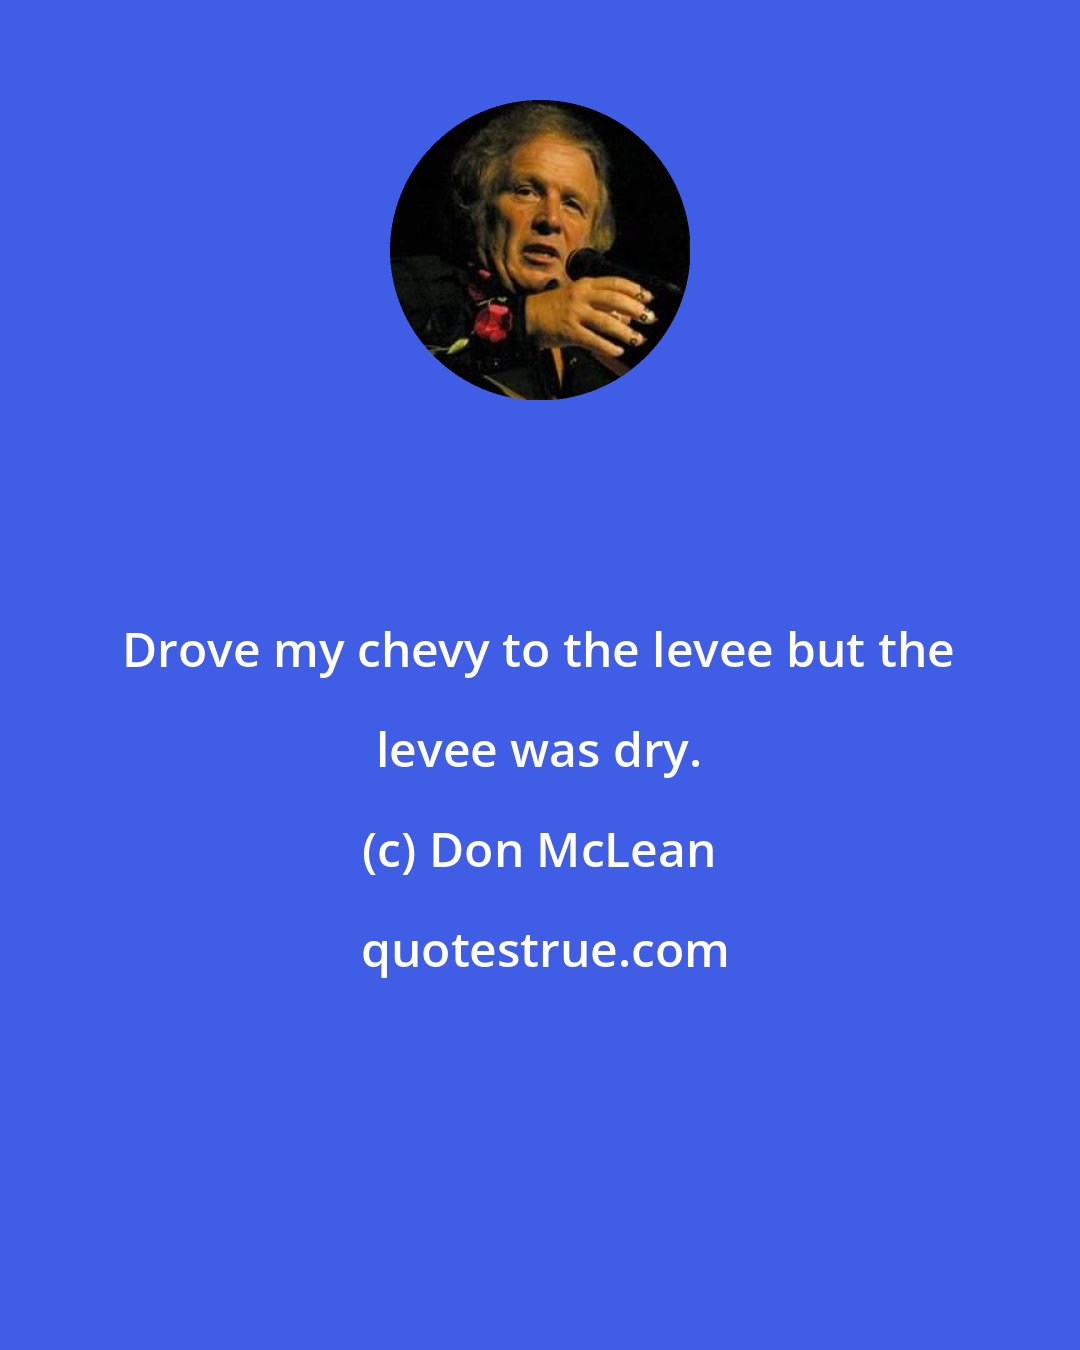 Don McLean: Drove my chevy to the levee but the levee was dry.